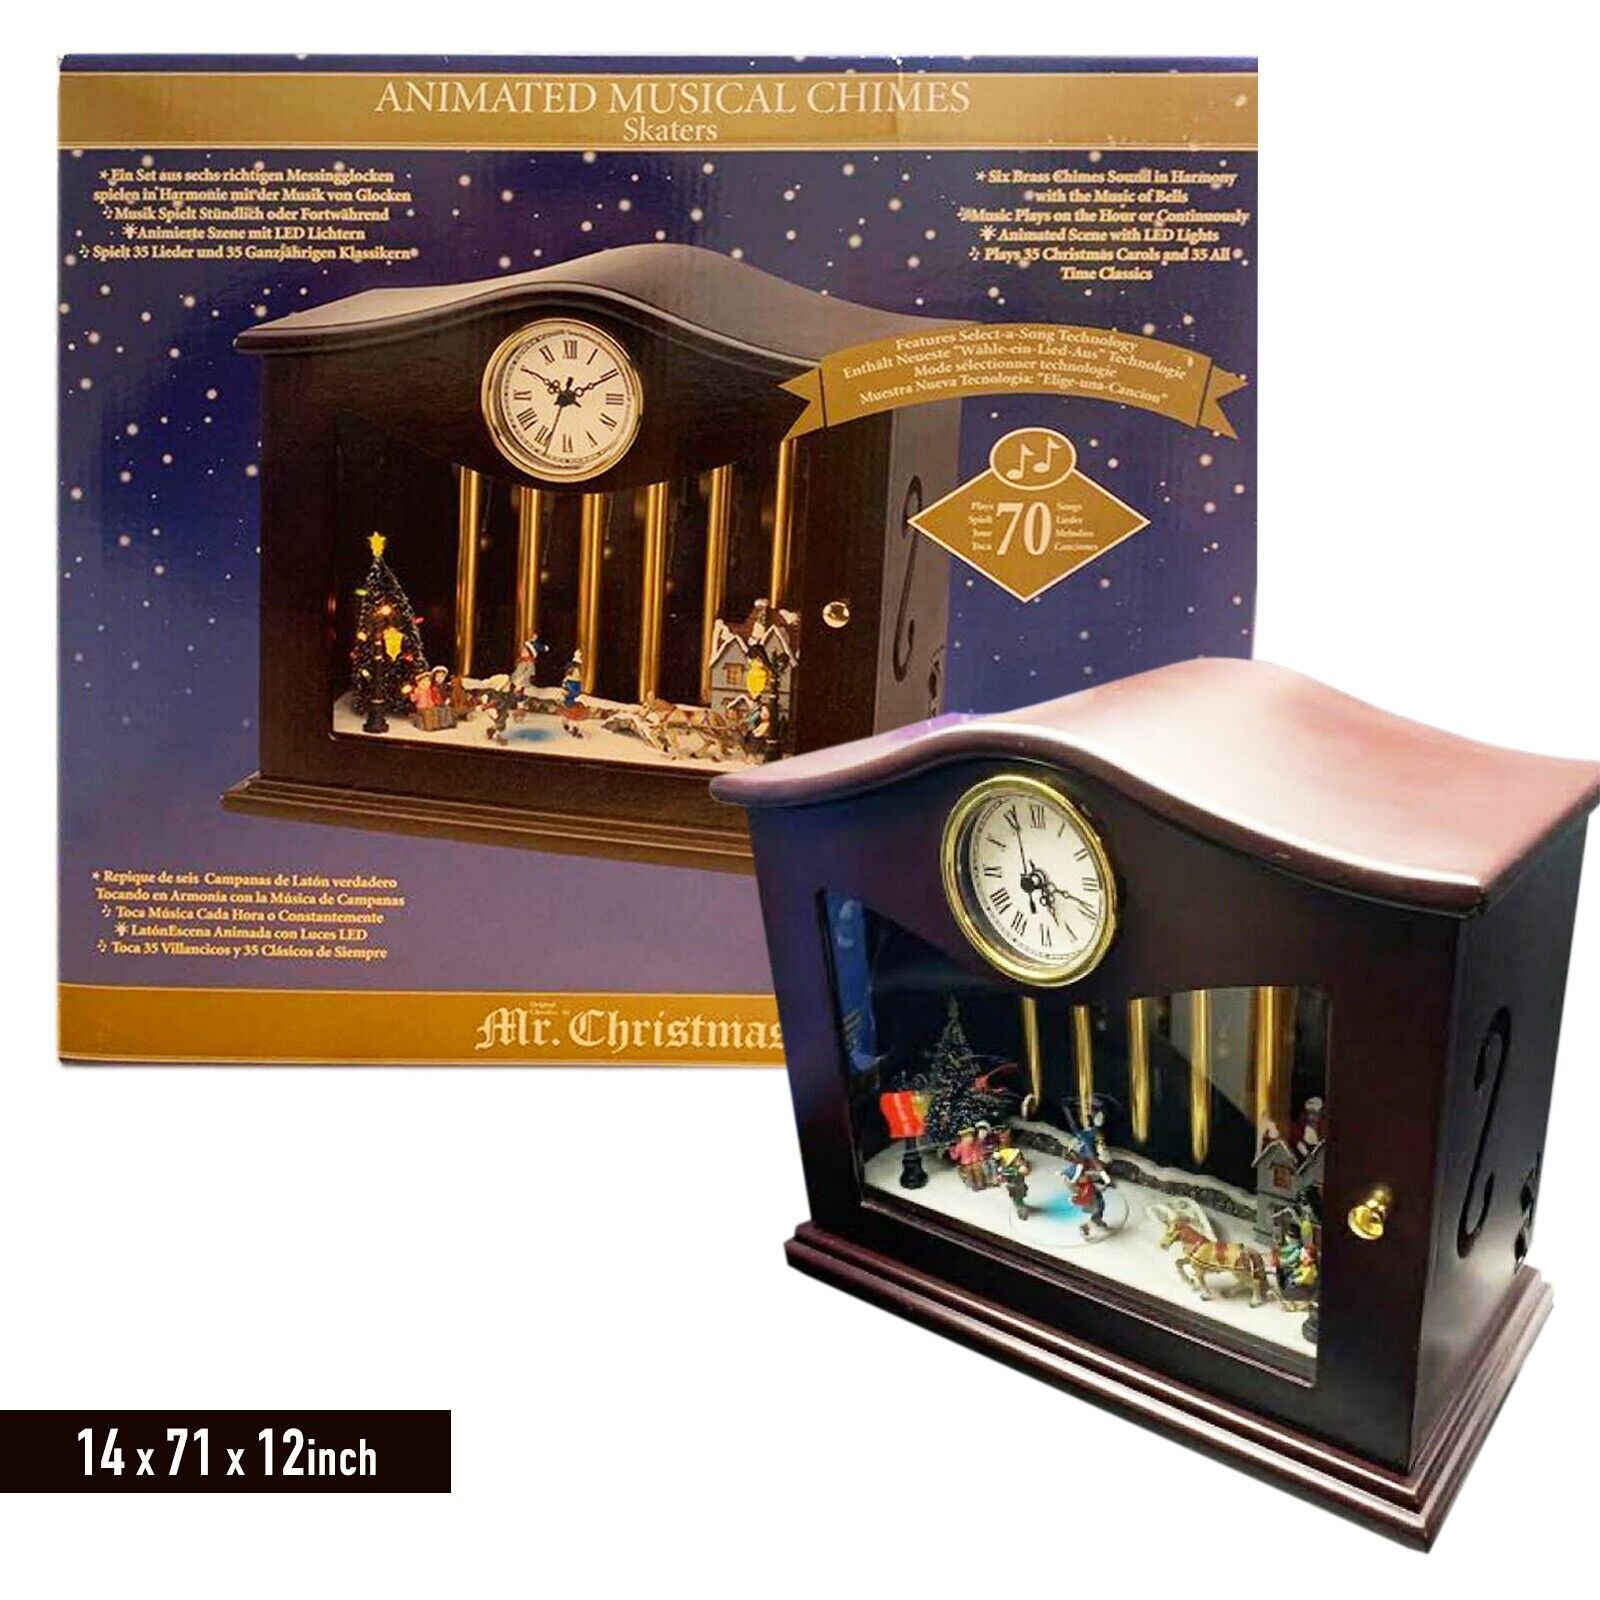 Mr. Christmas ANIMATED MUSICAL CHIMES Skater Music Box 70 Songs Table Clock New